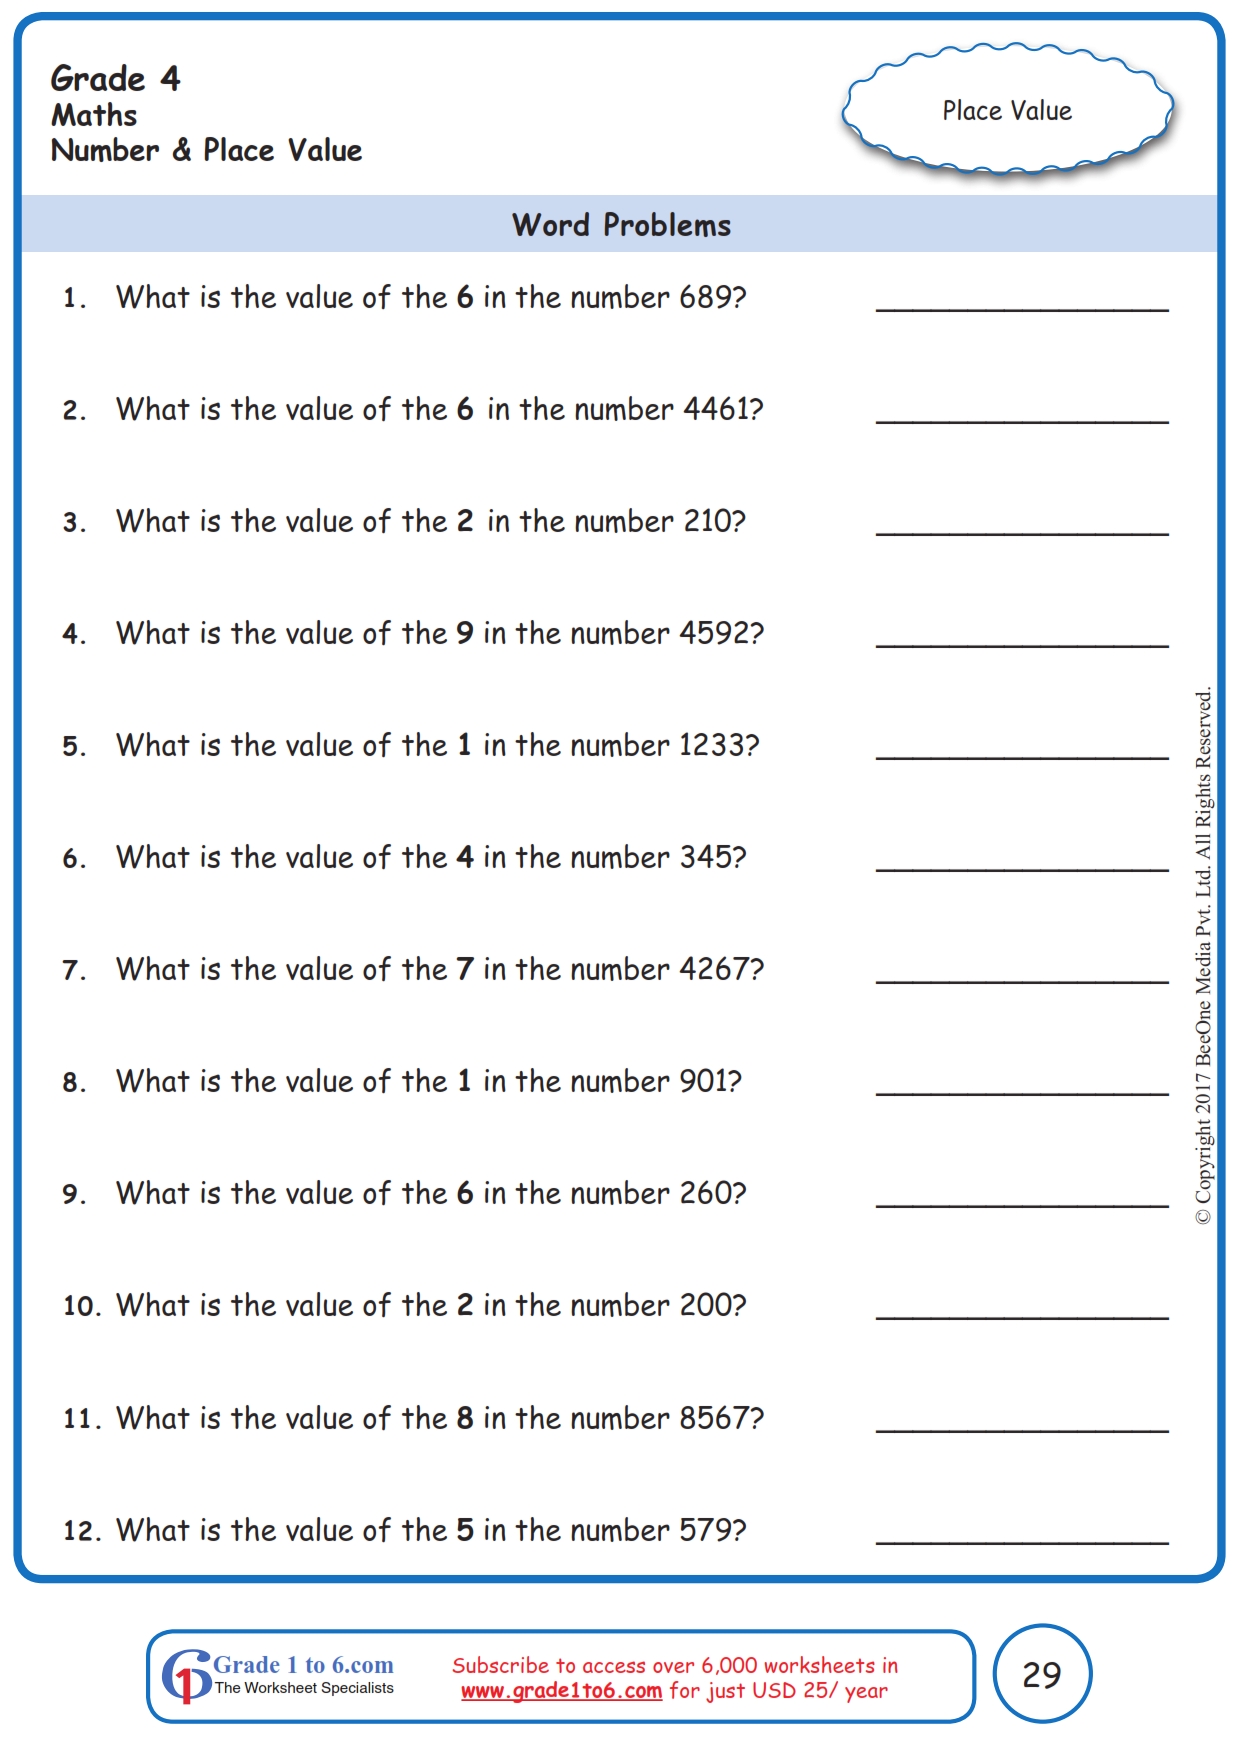 Place Values Worksheets